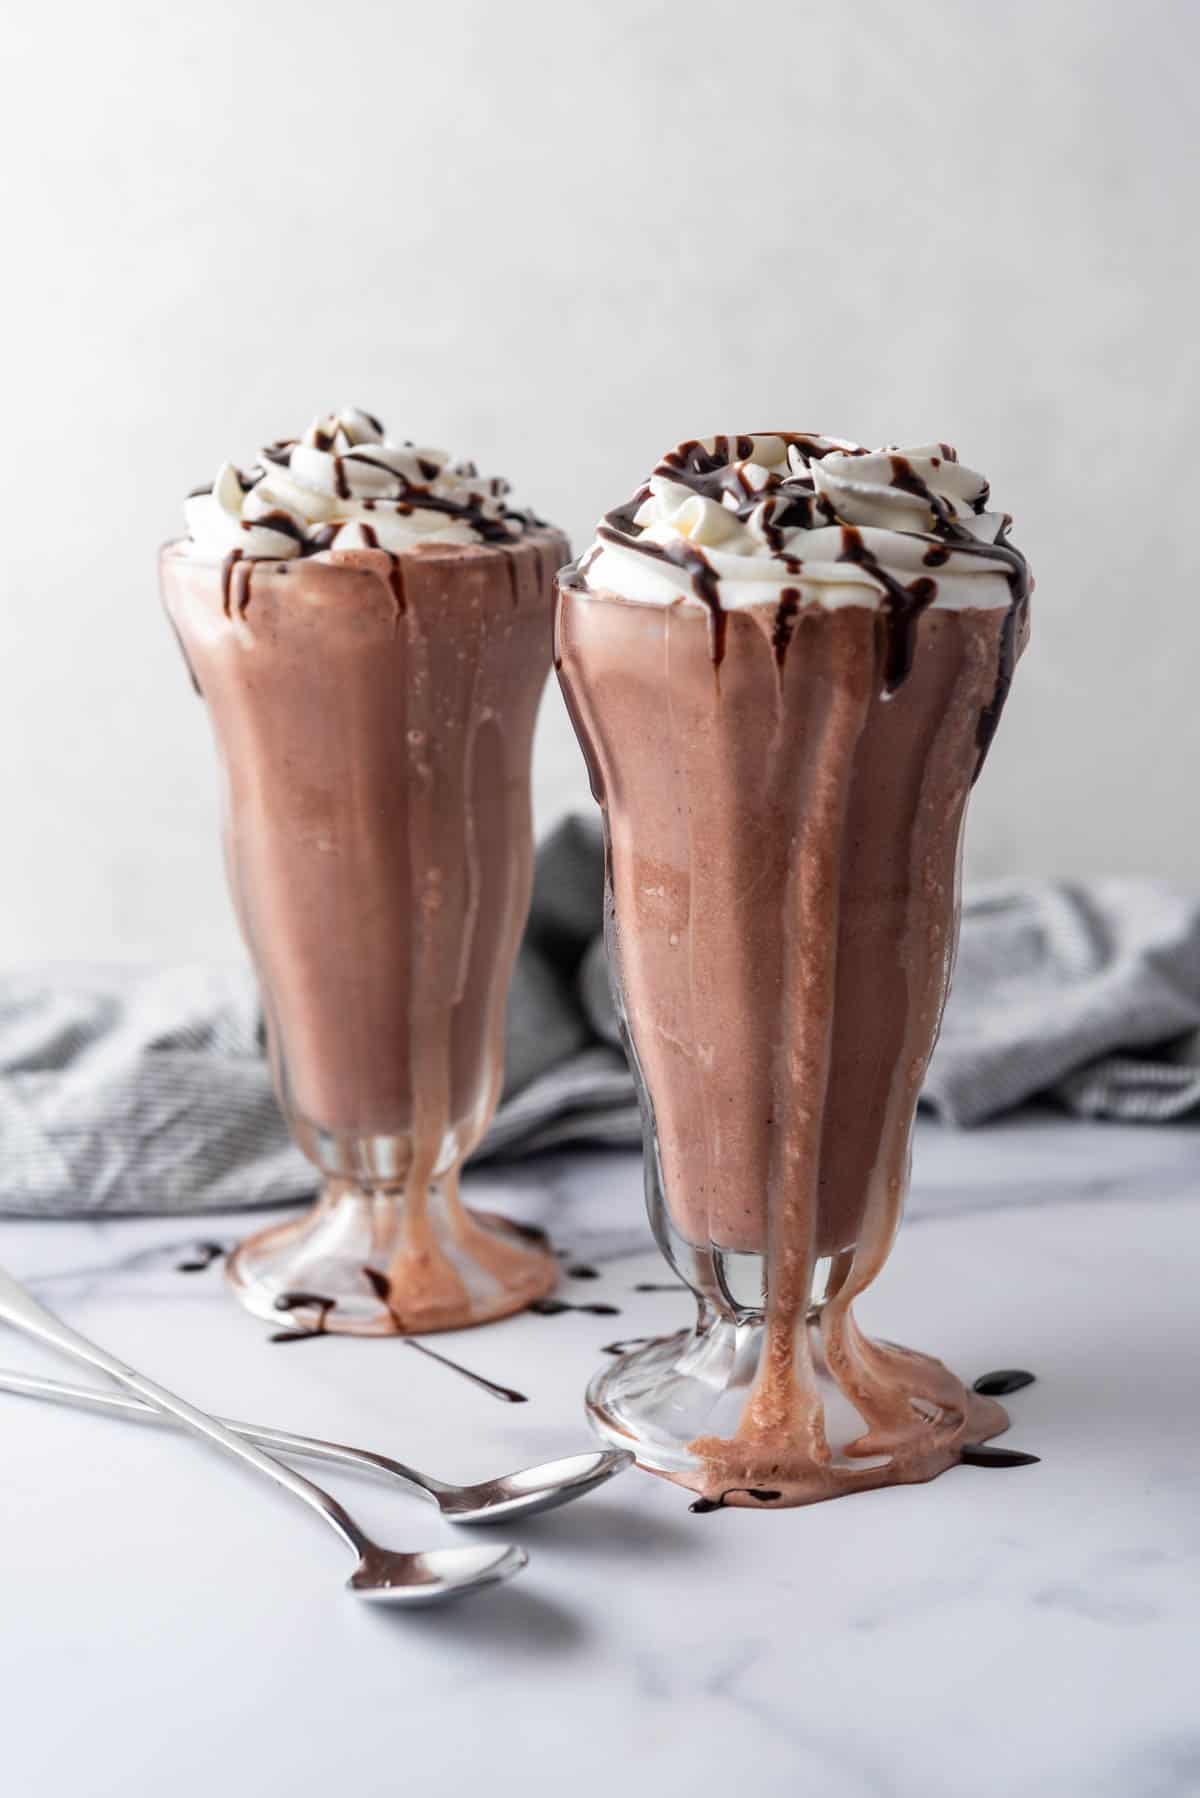 Two tall milkshake glasses filled with chocolate milkshakes and topped with whipped cream and chocolate sauce.